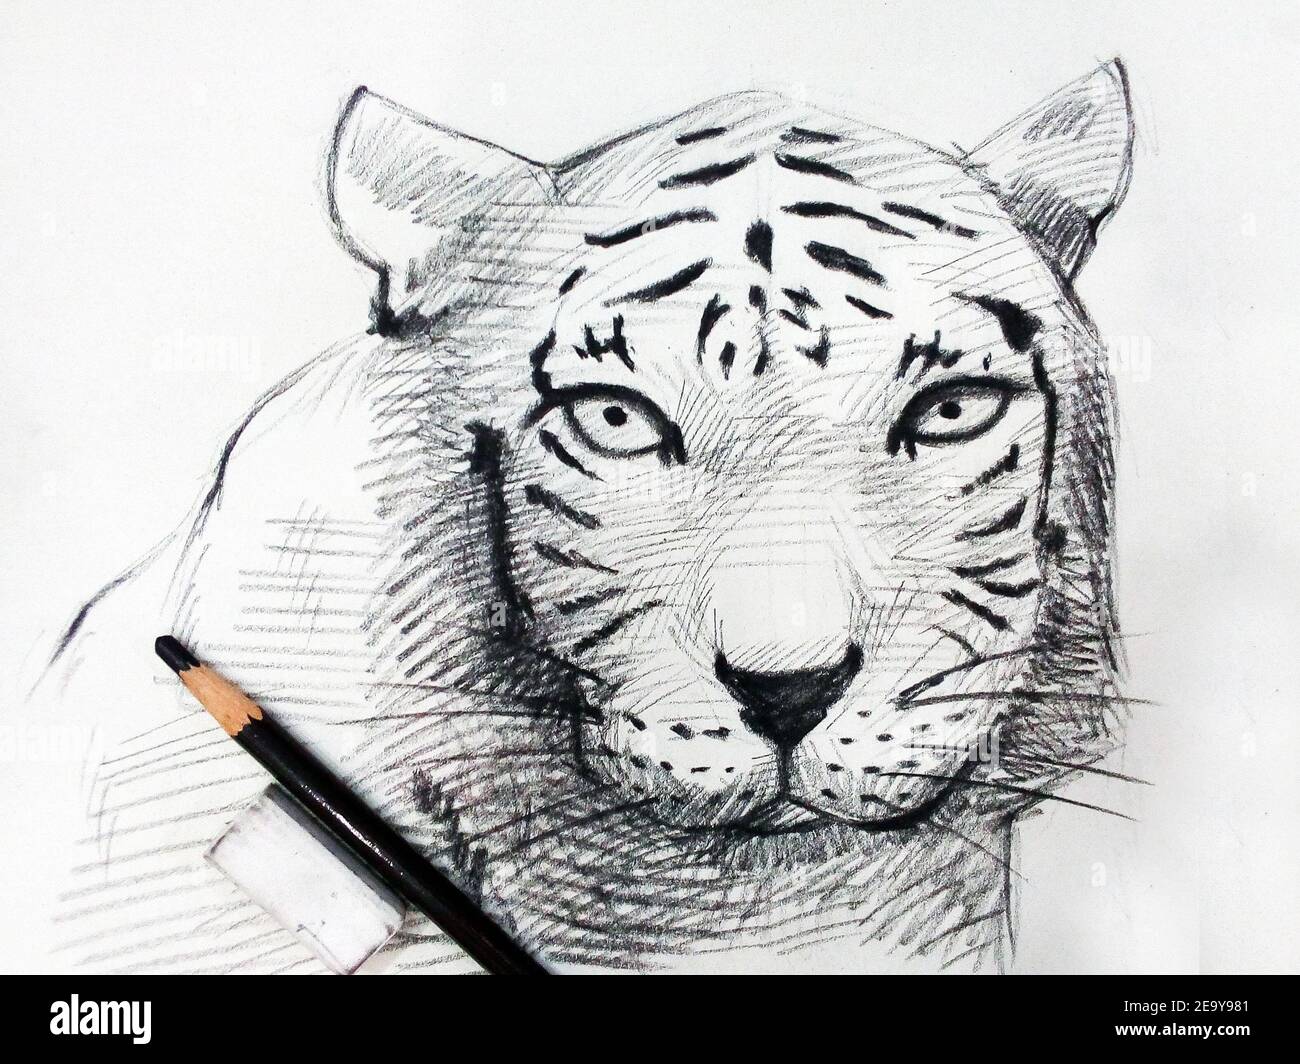 How to Draw a Tiger - YouTube